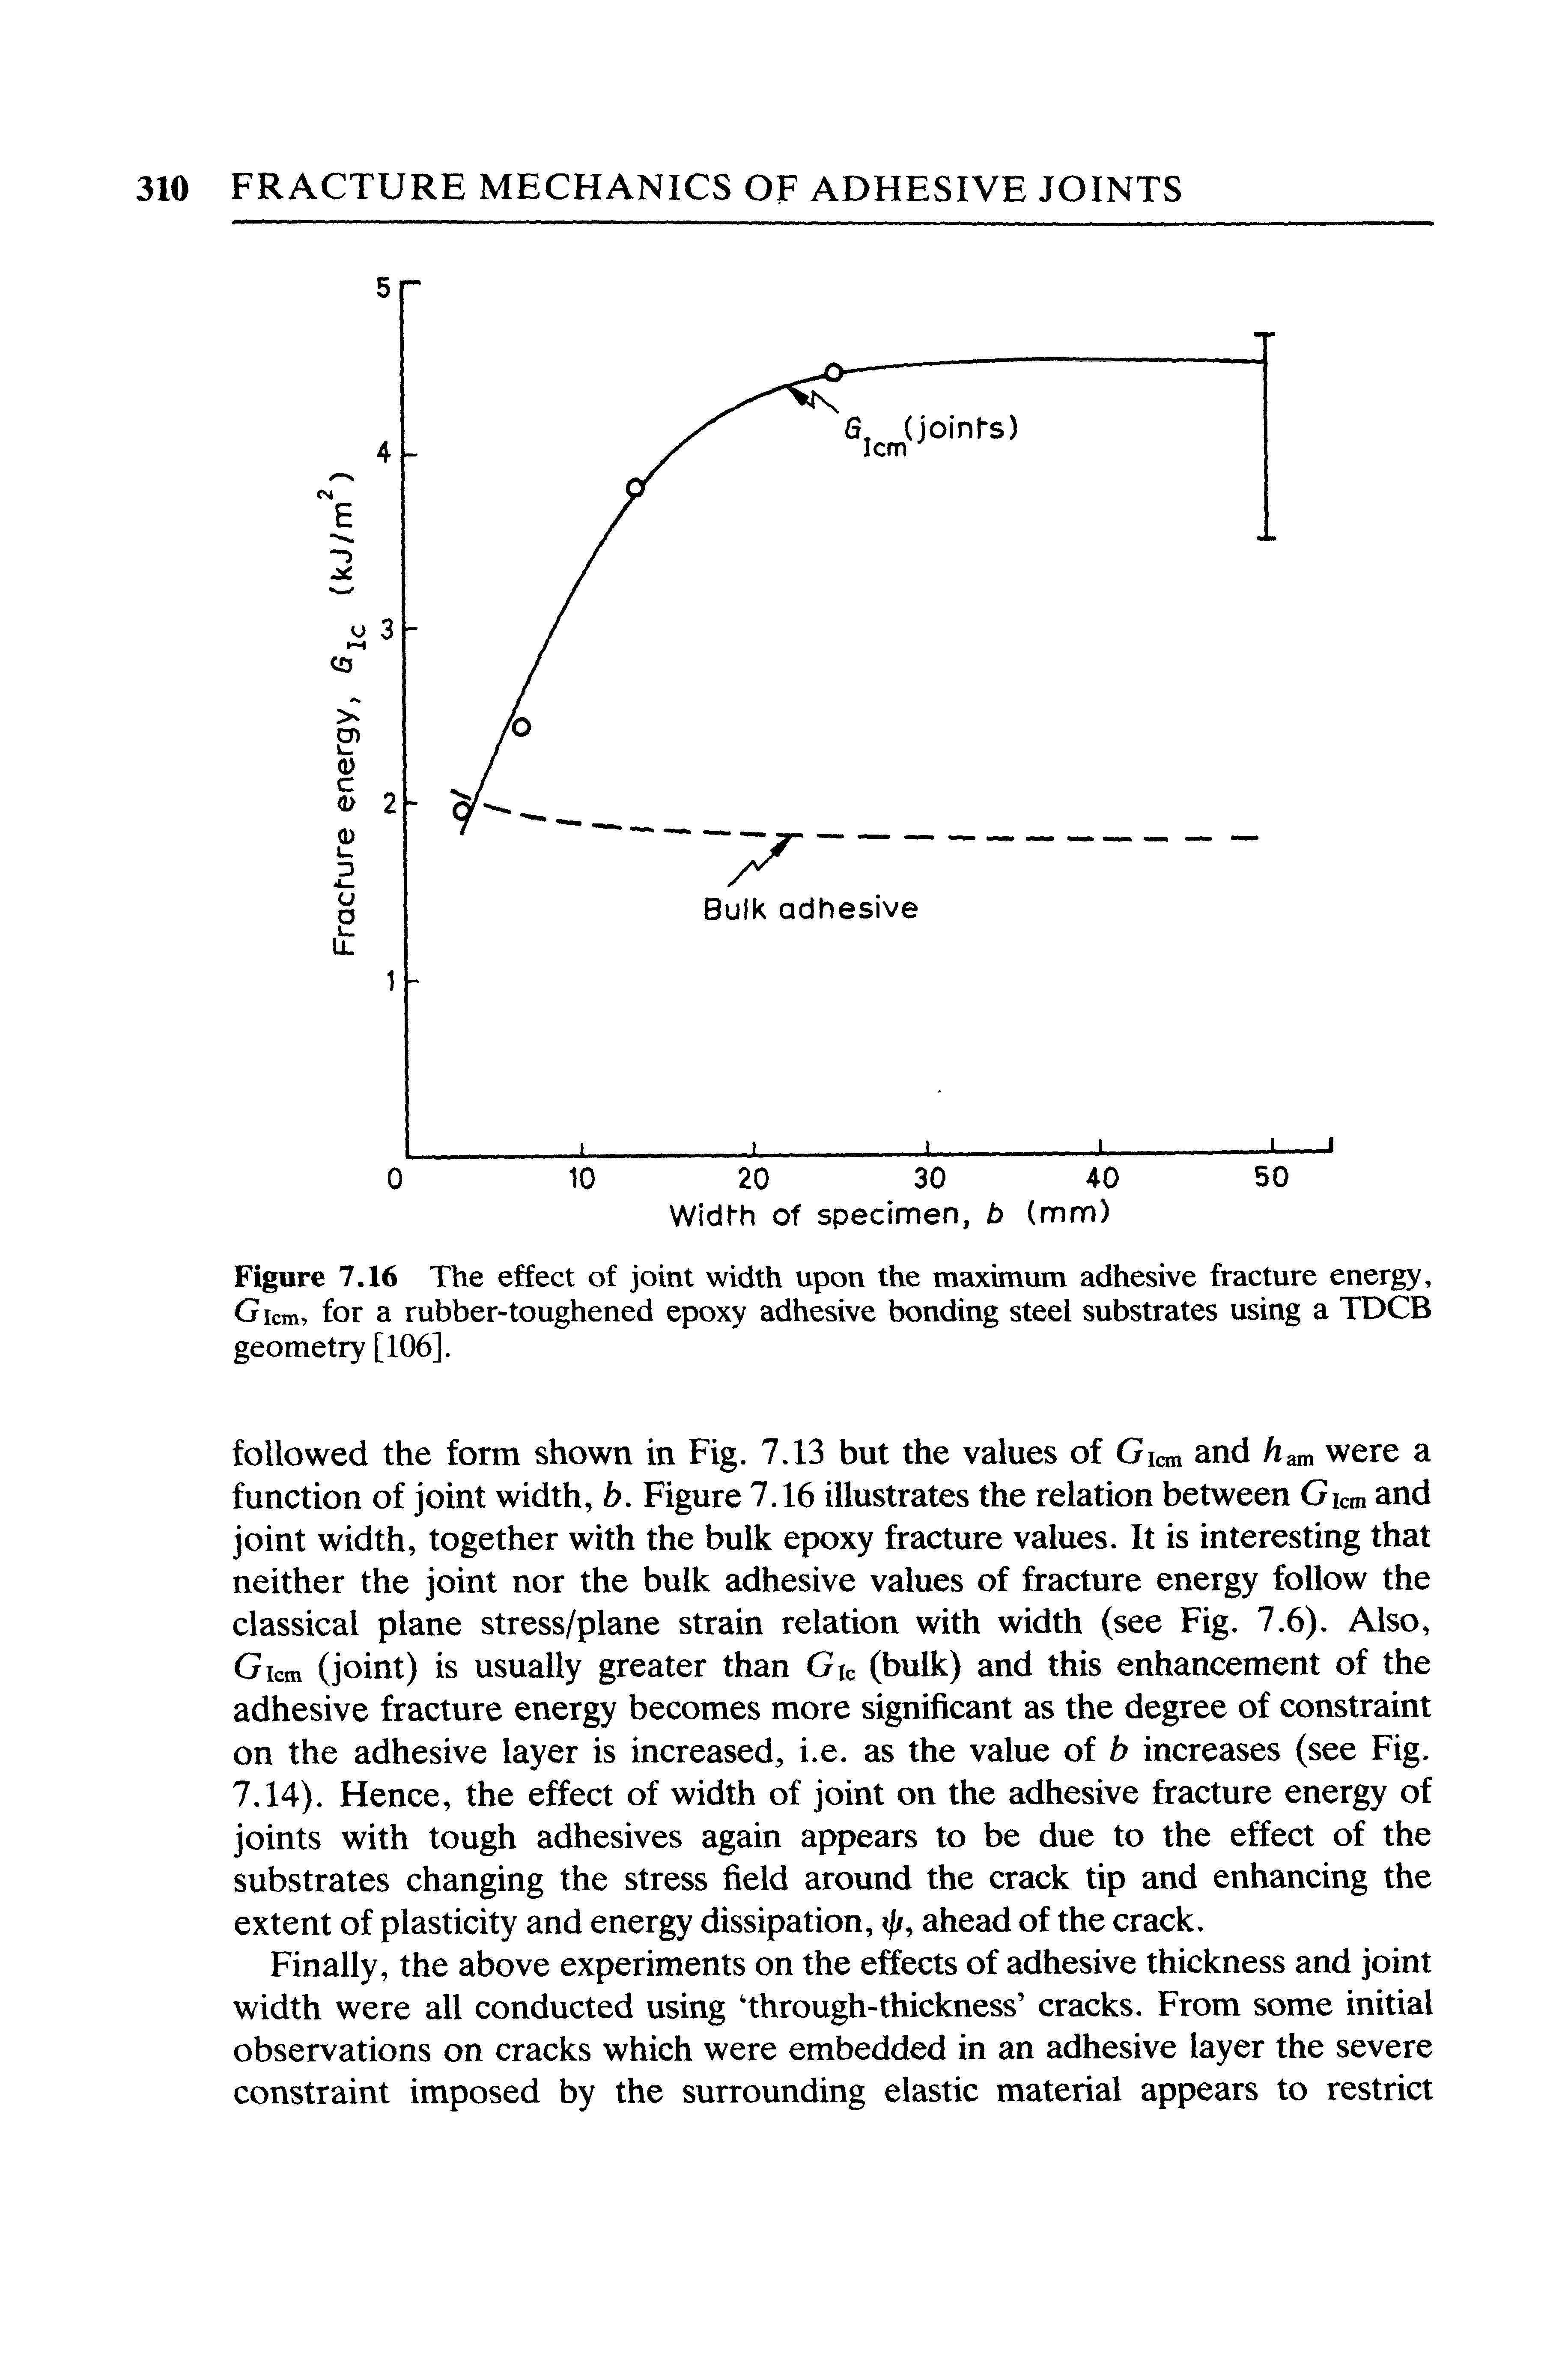 Figure 7.16 The effect of joint width upon the maximum adhesive fracture energy, Clem, for a rubber-toughened epoxy adhesive bonding steel substrates using a TDCB geometry [106].